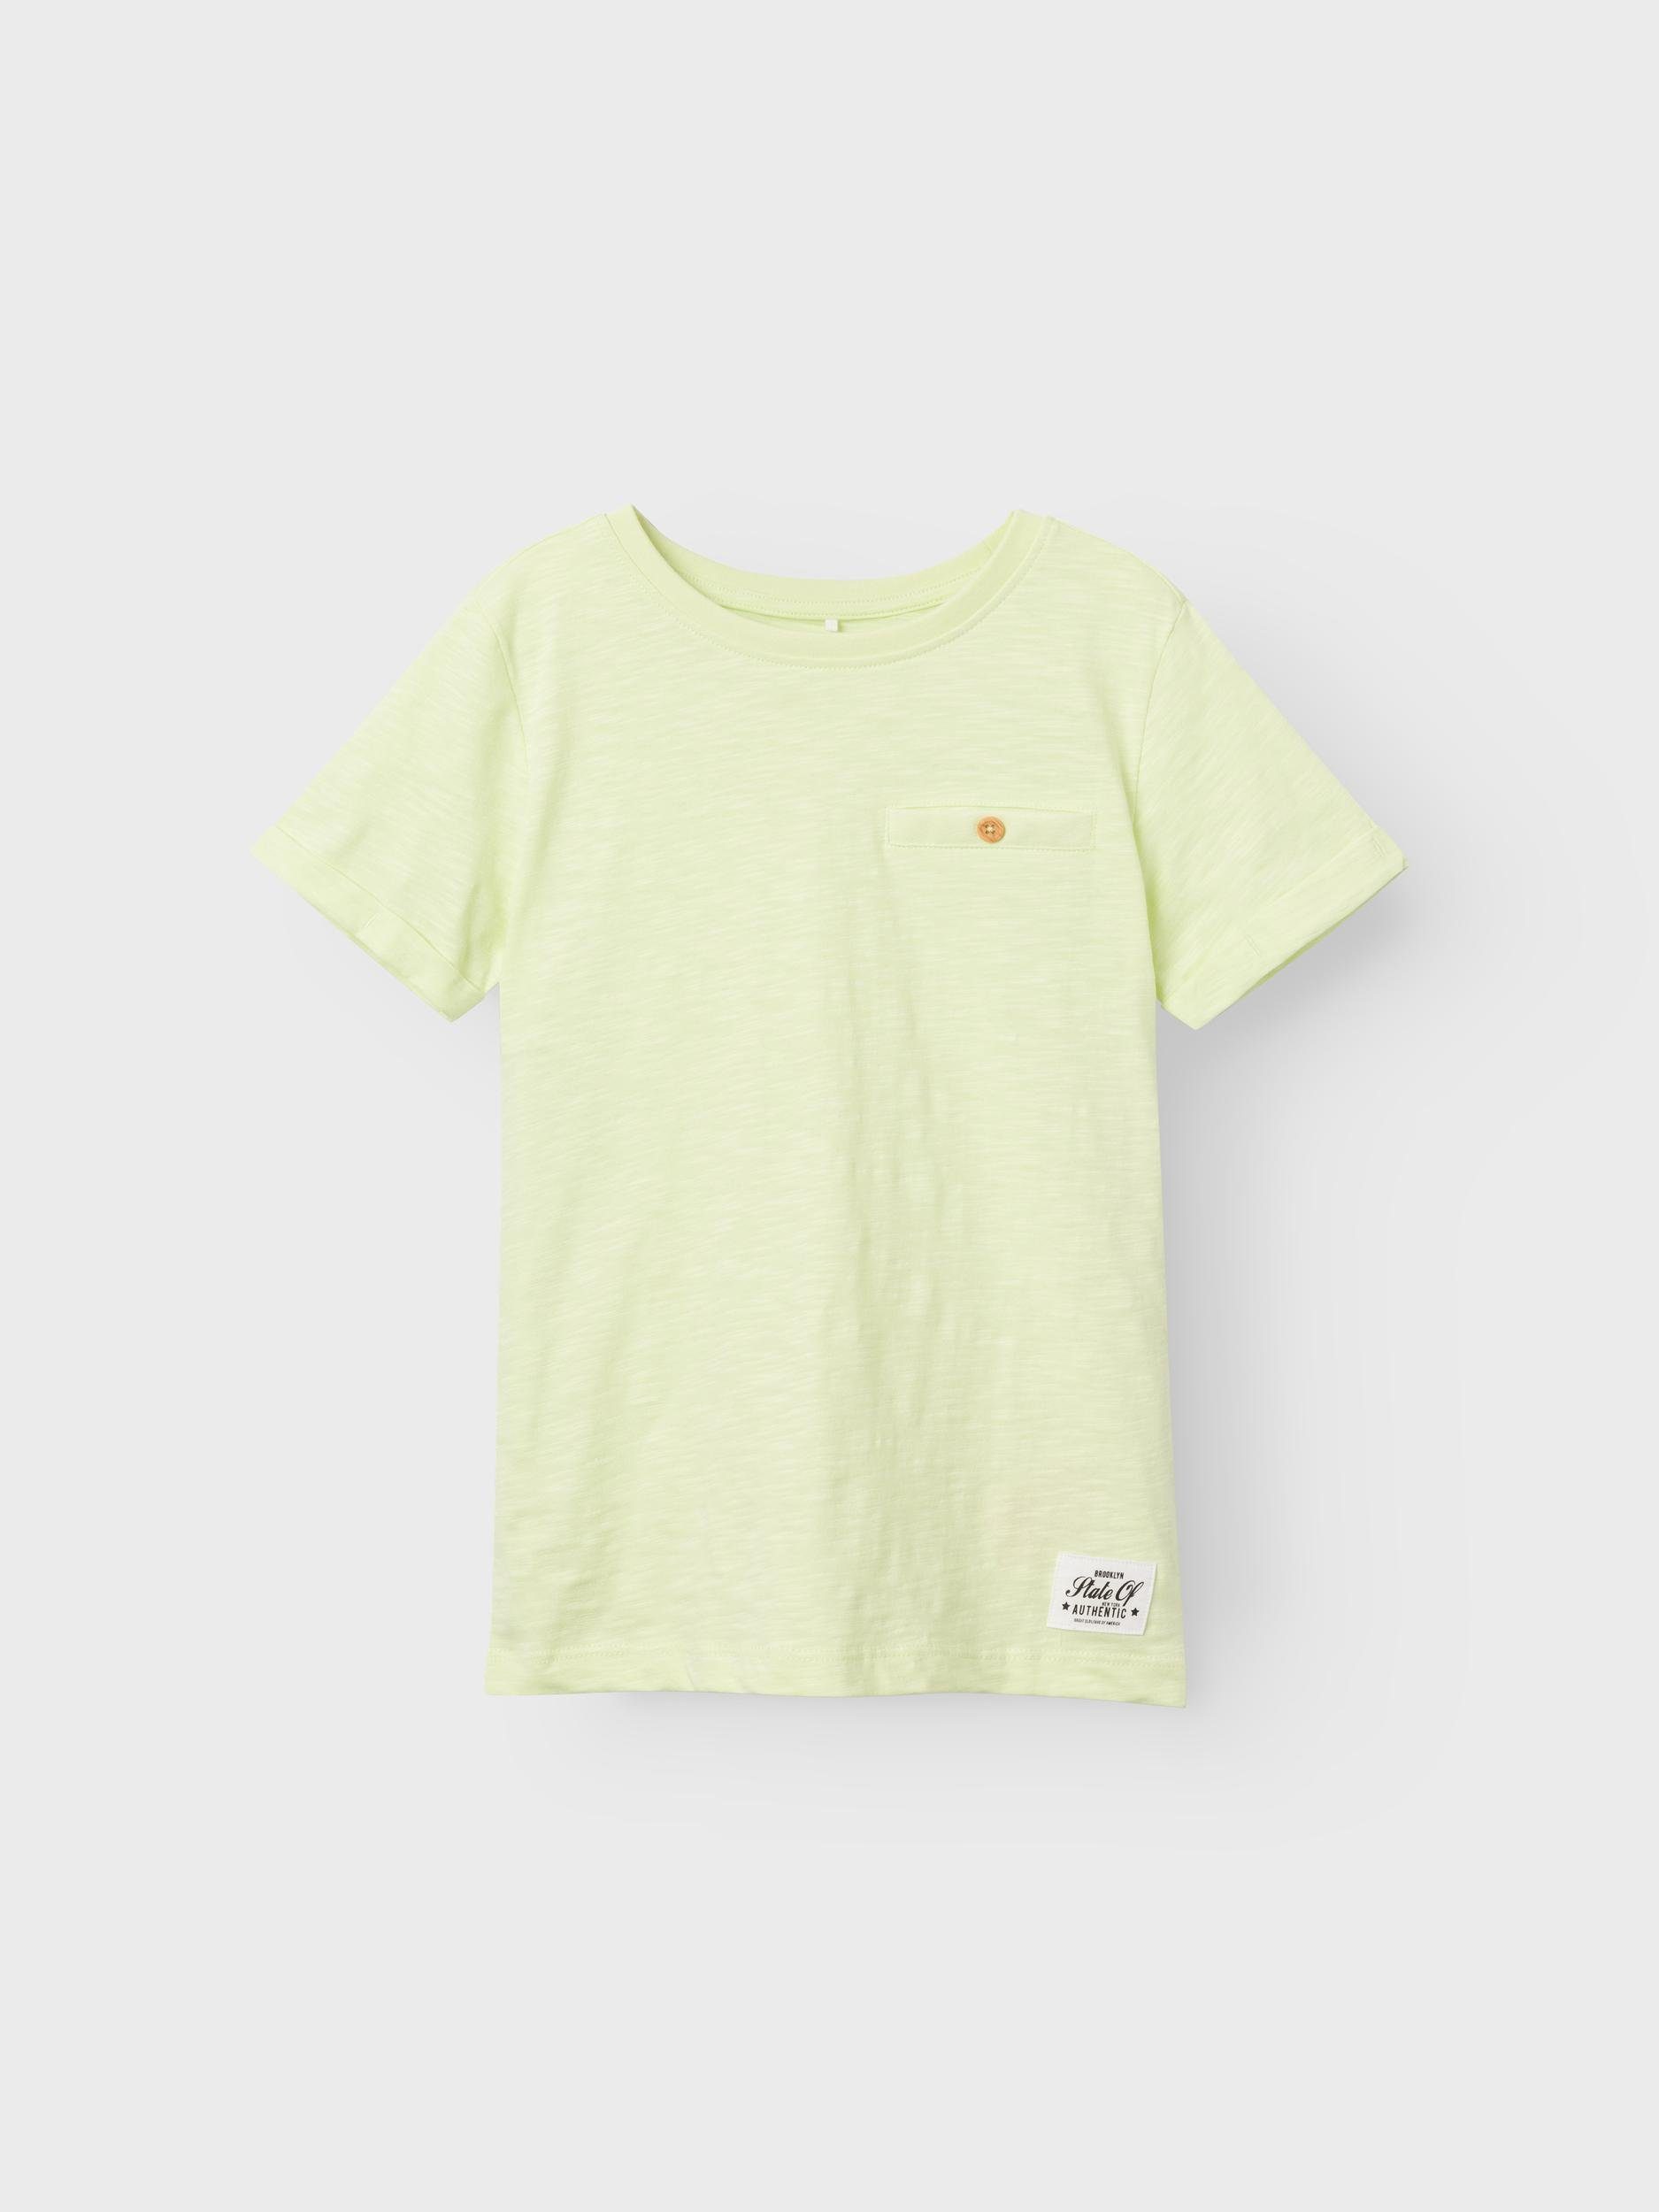 T-Shirt It lime NKMVINCENTTOP cream F Name